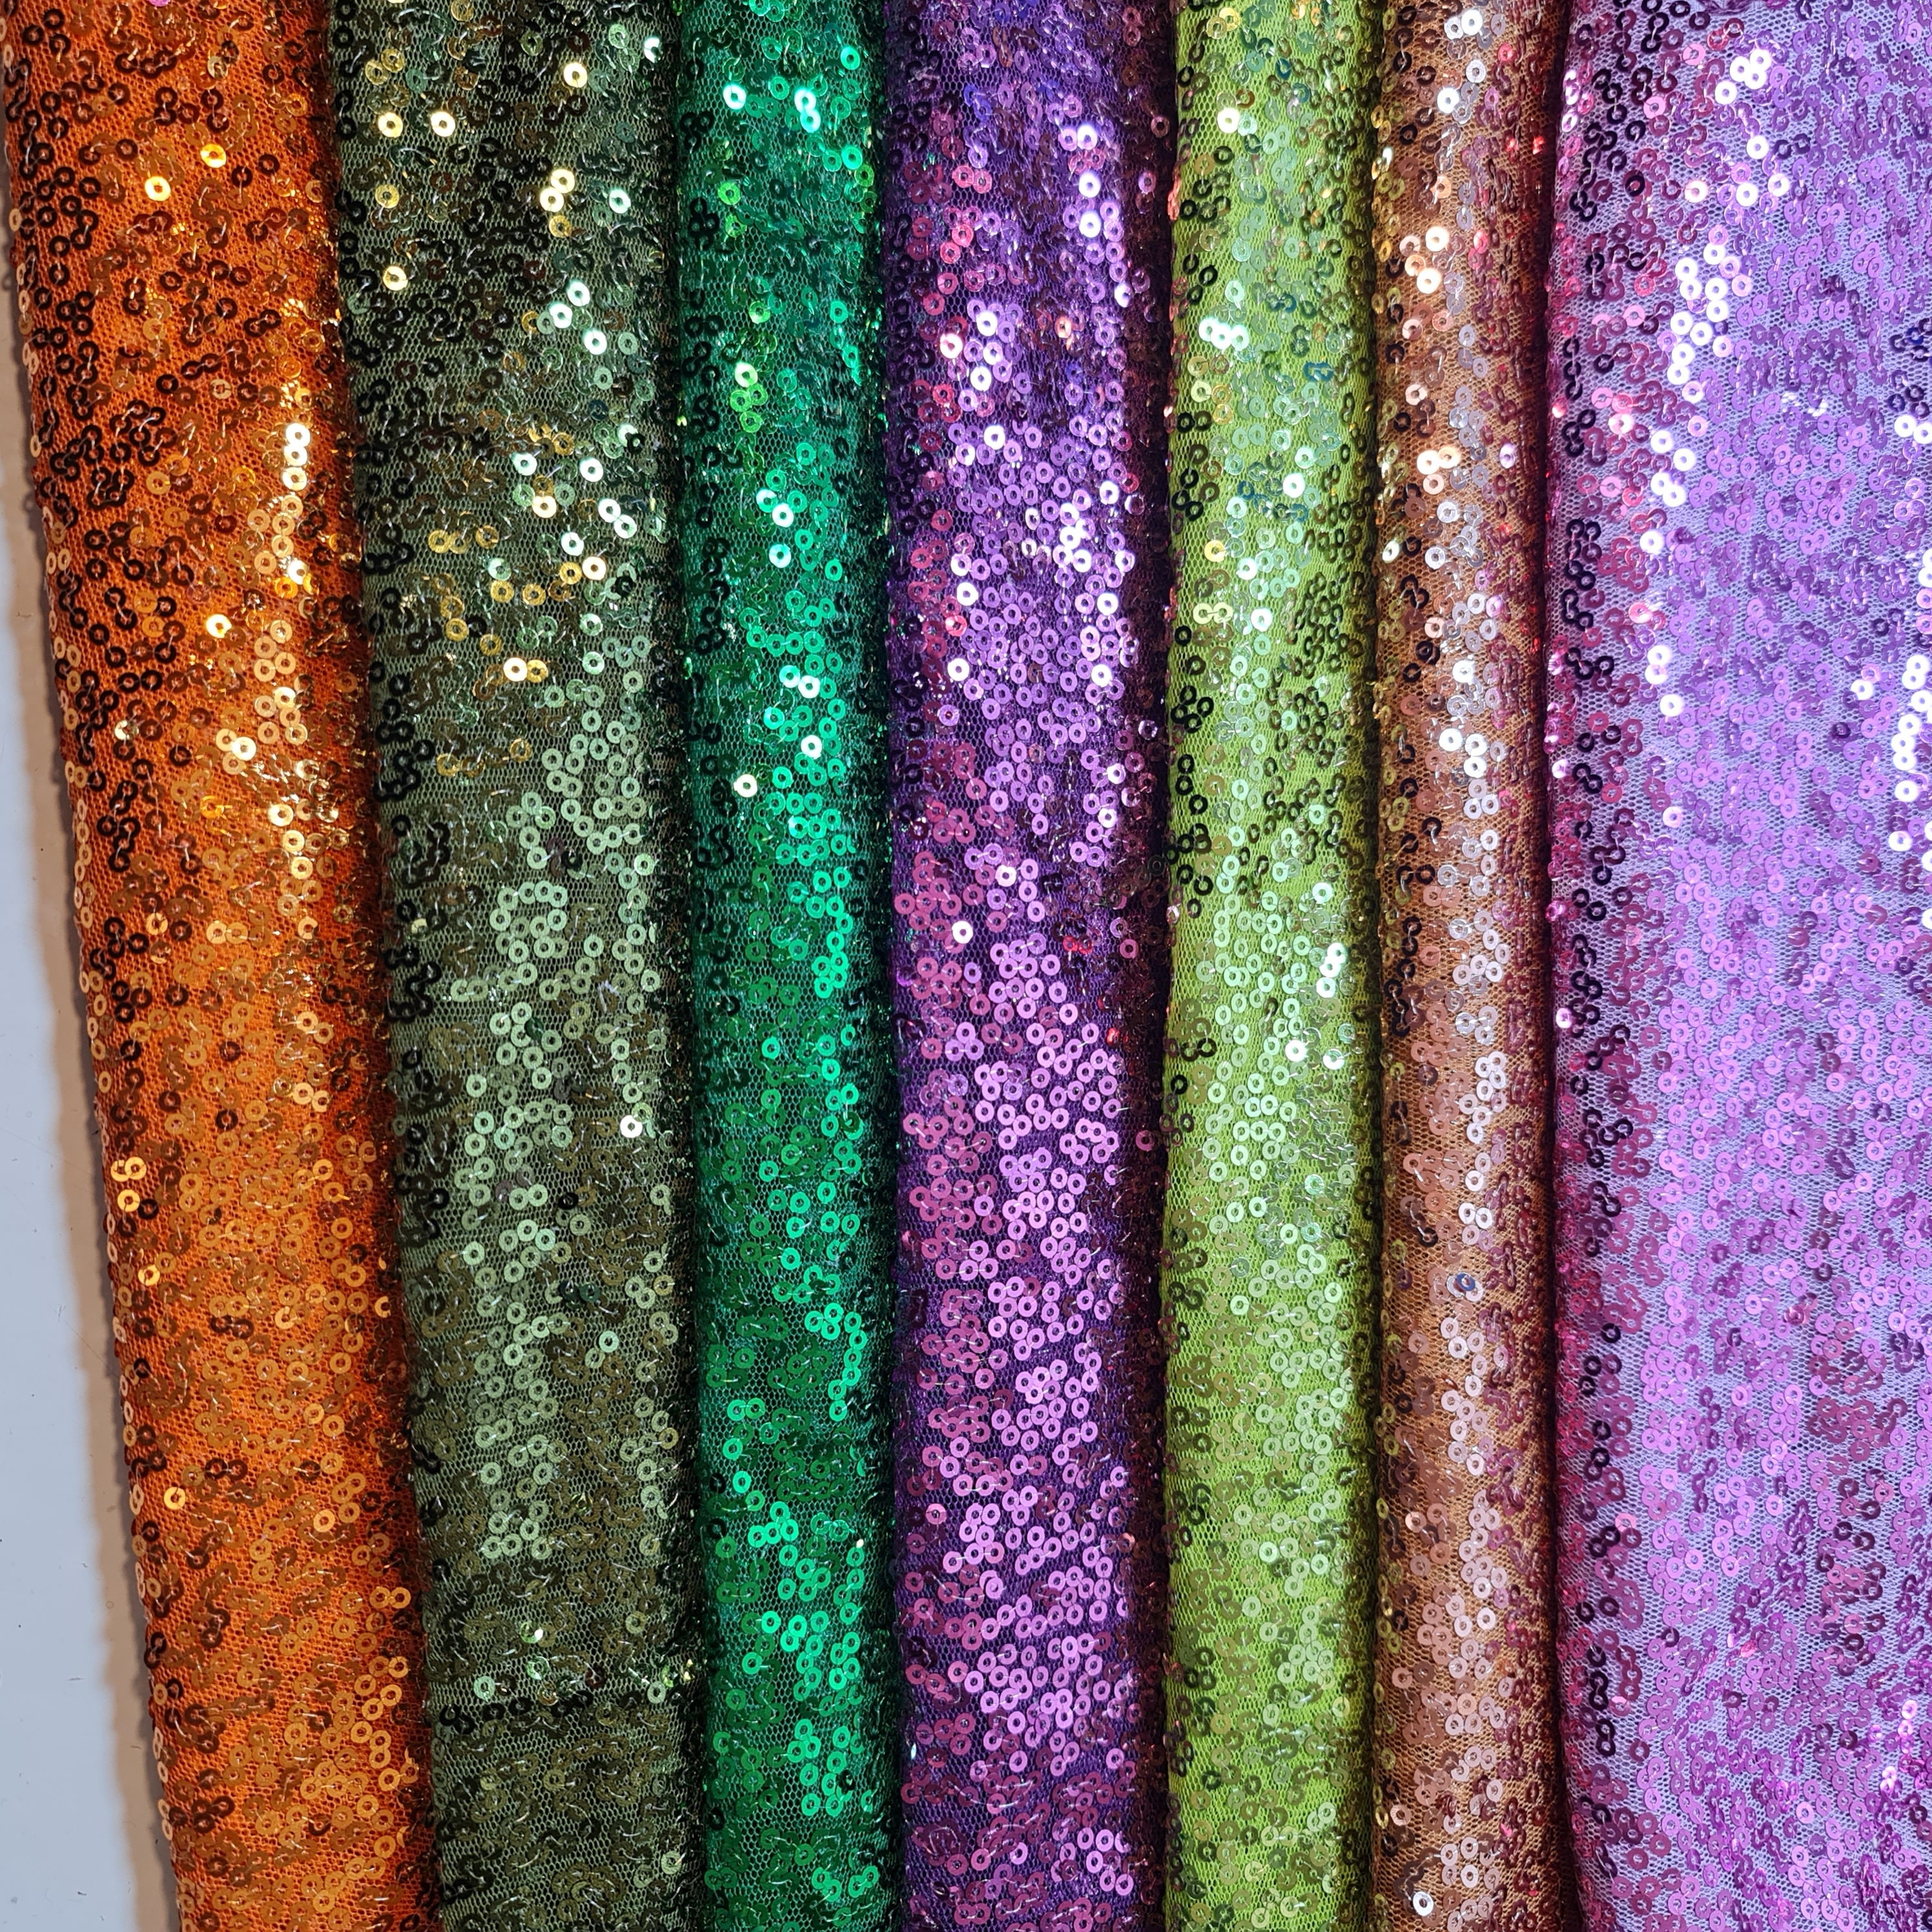 Gold Sequin Fabric Sparkly Shiny Bling Material Cloth 130cm Wide 1 1/2 metre